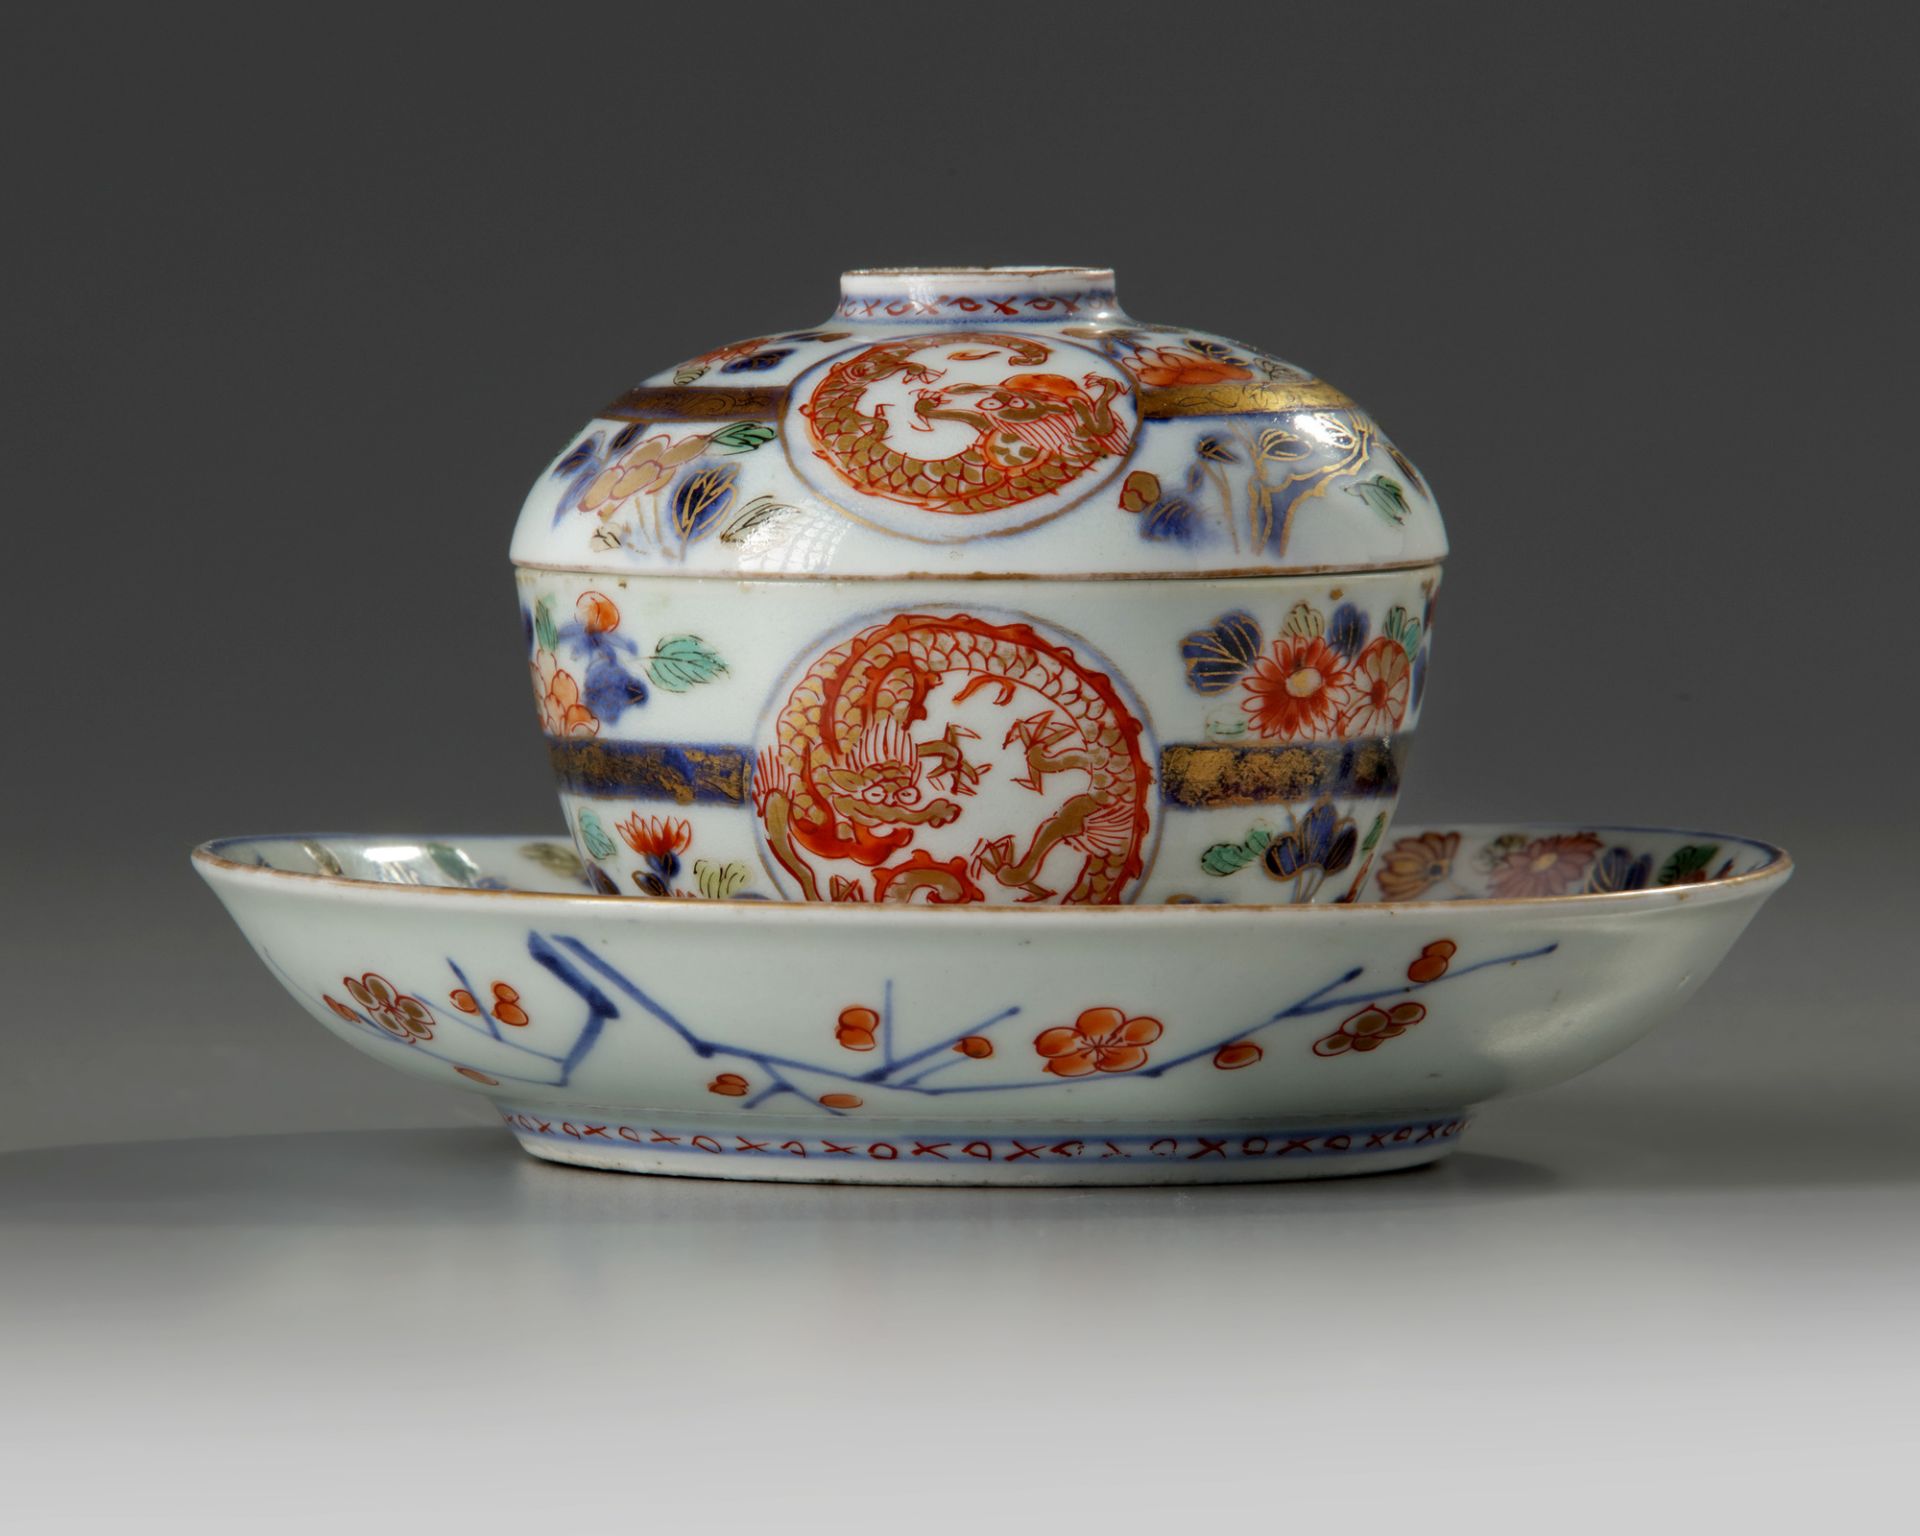 A JAPANESE IMARI TEACUP WITH COVER AND SAUCER, 17TH CENTURY - Image 4 of 6